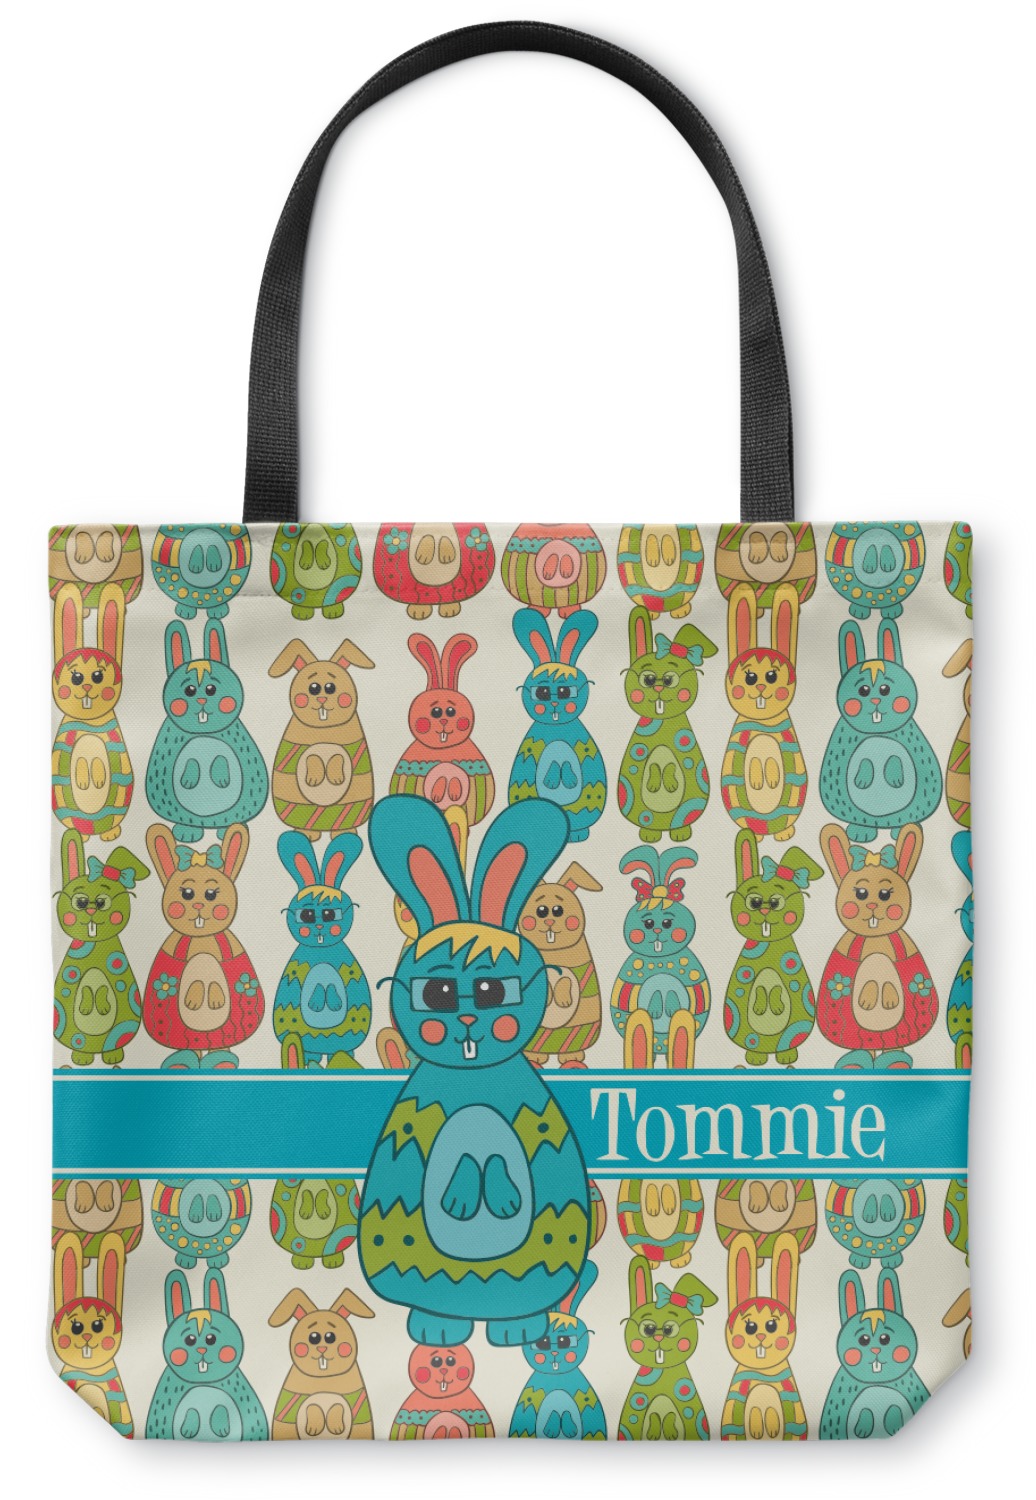 Fun Easter Bunnies Canvas Tote Bag - Medium - 16"x16" (Personalized